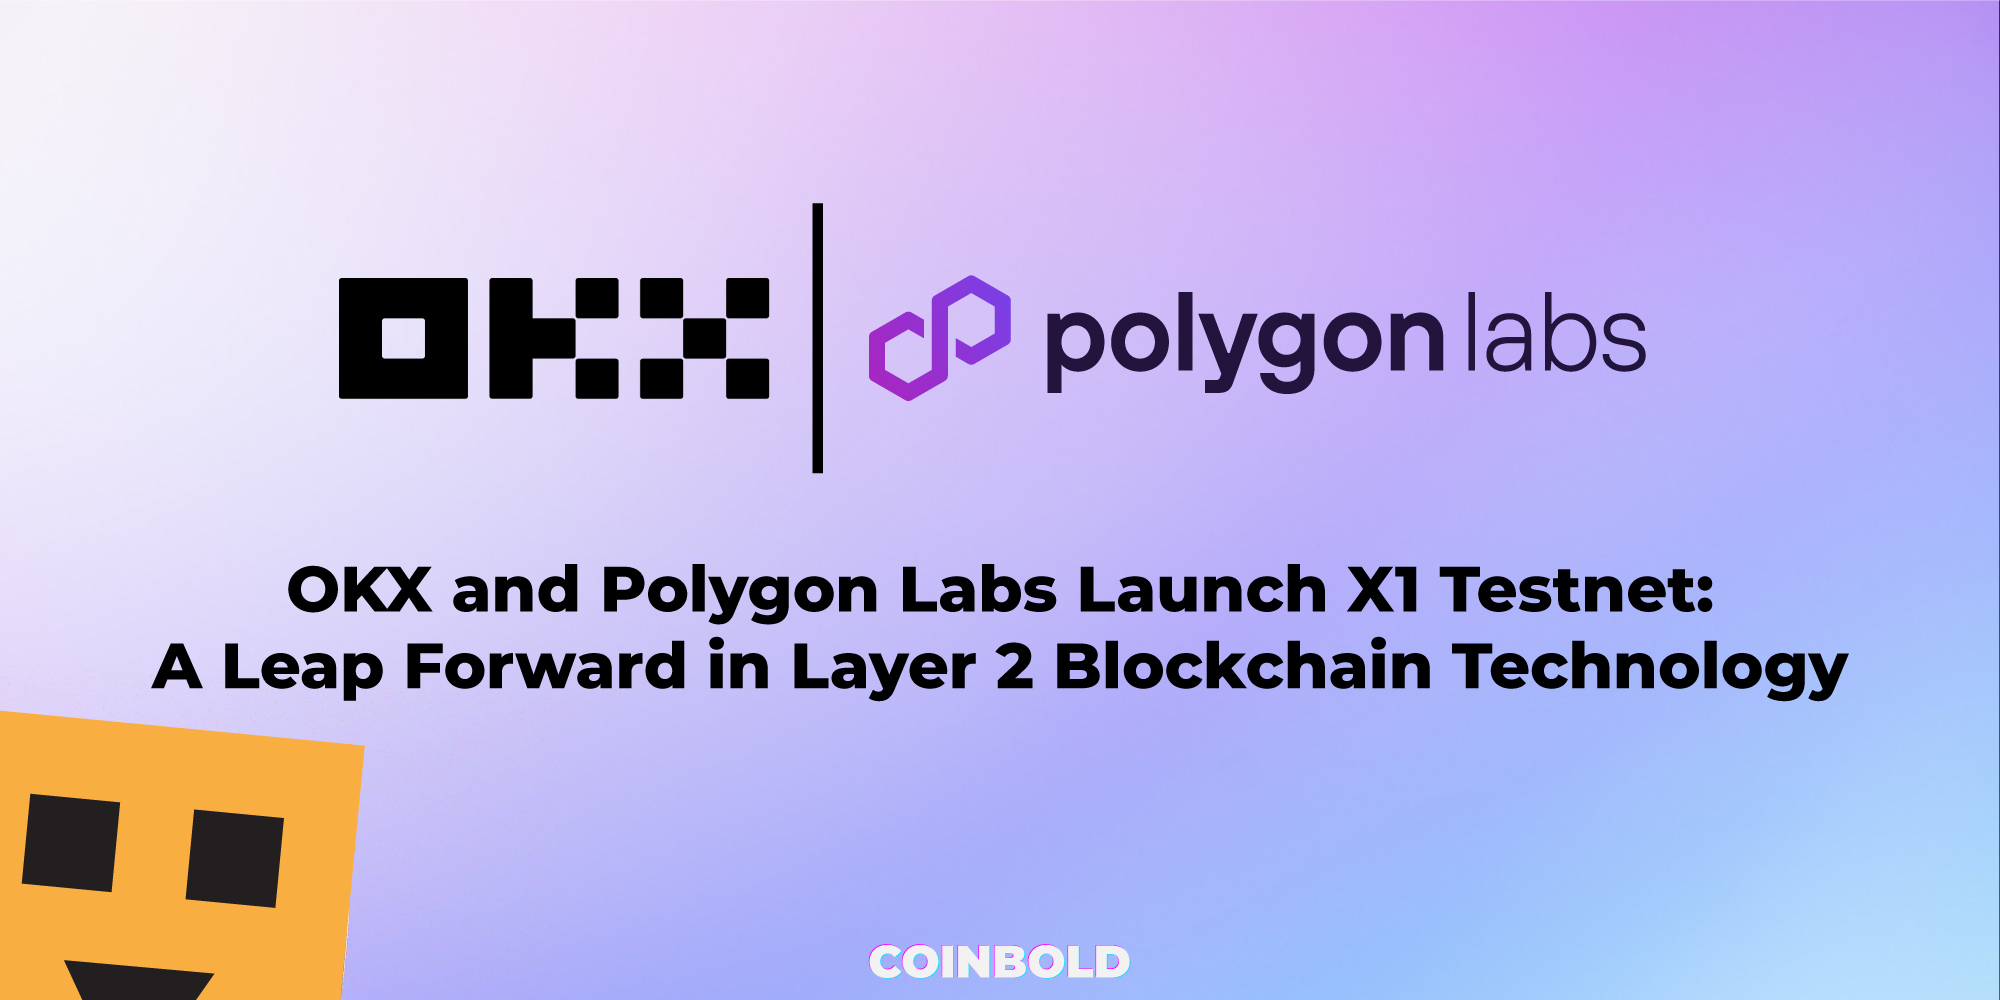 OKX and Polygon Labs Launch X1 Testnet: A Leap Forward in Layer 2 Blockchain Technology